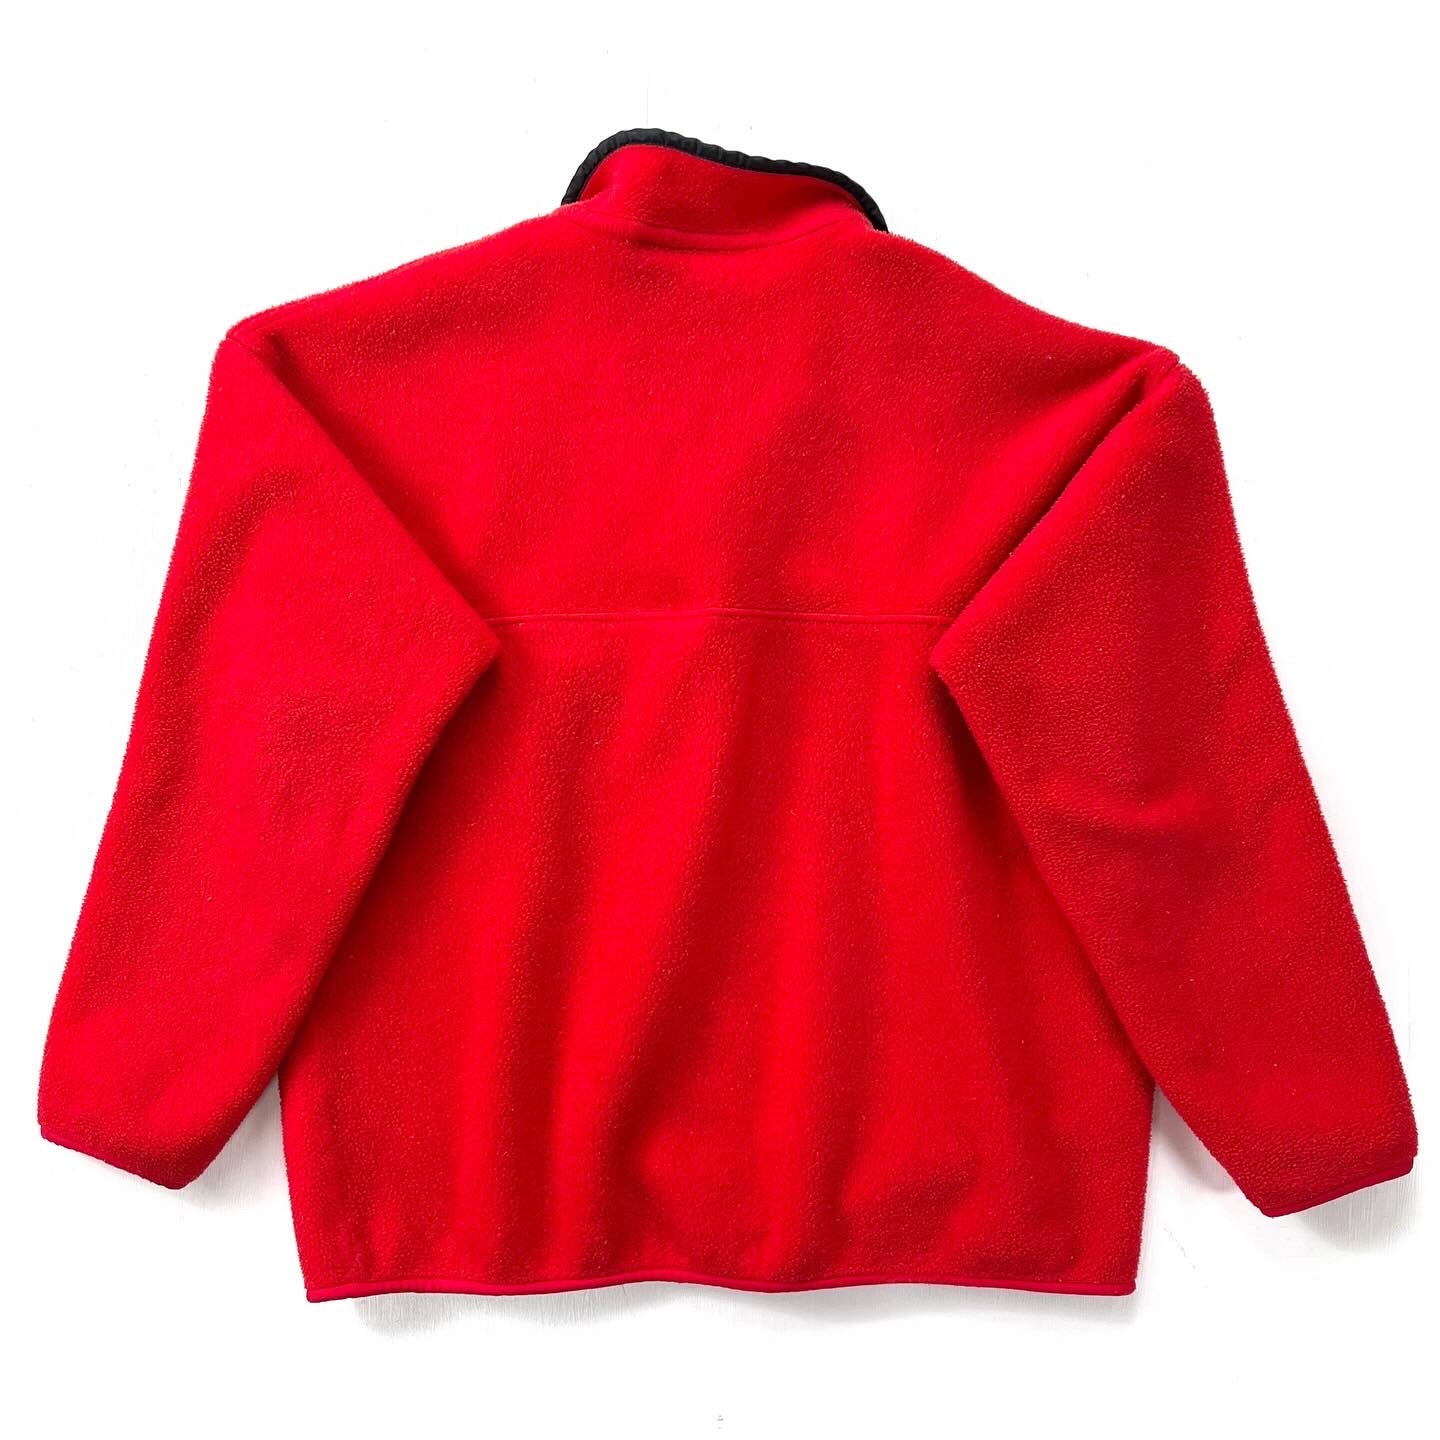 1994 Patagonia Synchilla Snap-T Fleece Pullover, French Red (XL)